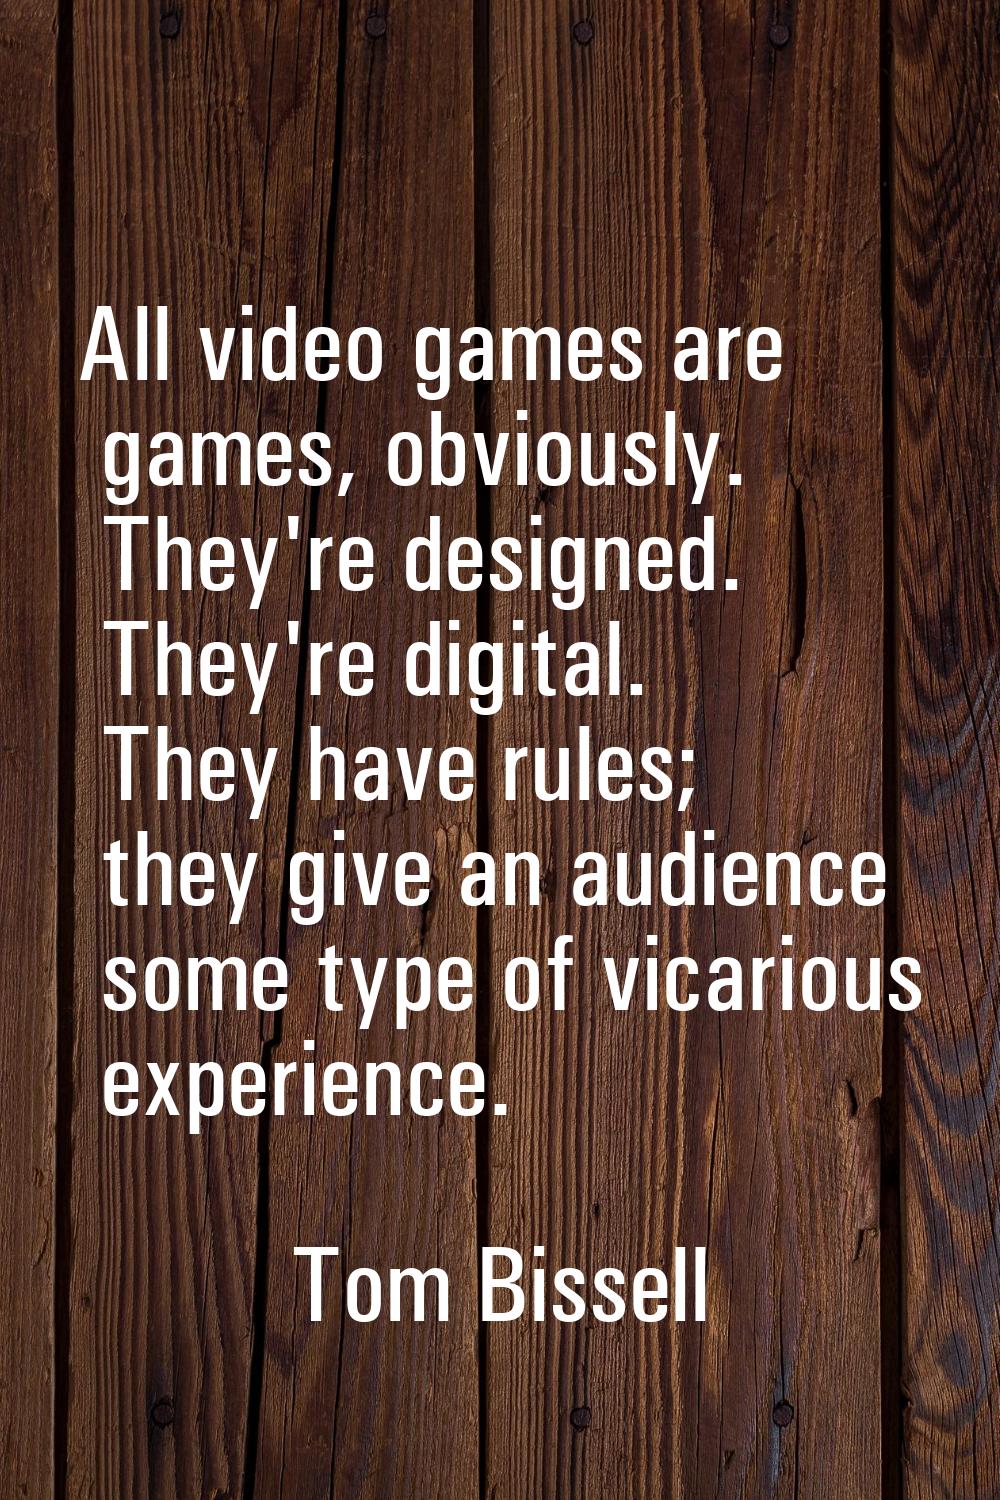 All video games are games, obviously. They're designed. They're digital. They have rules; they give